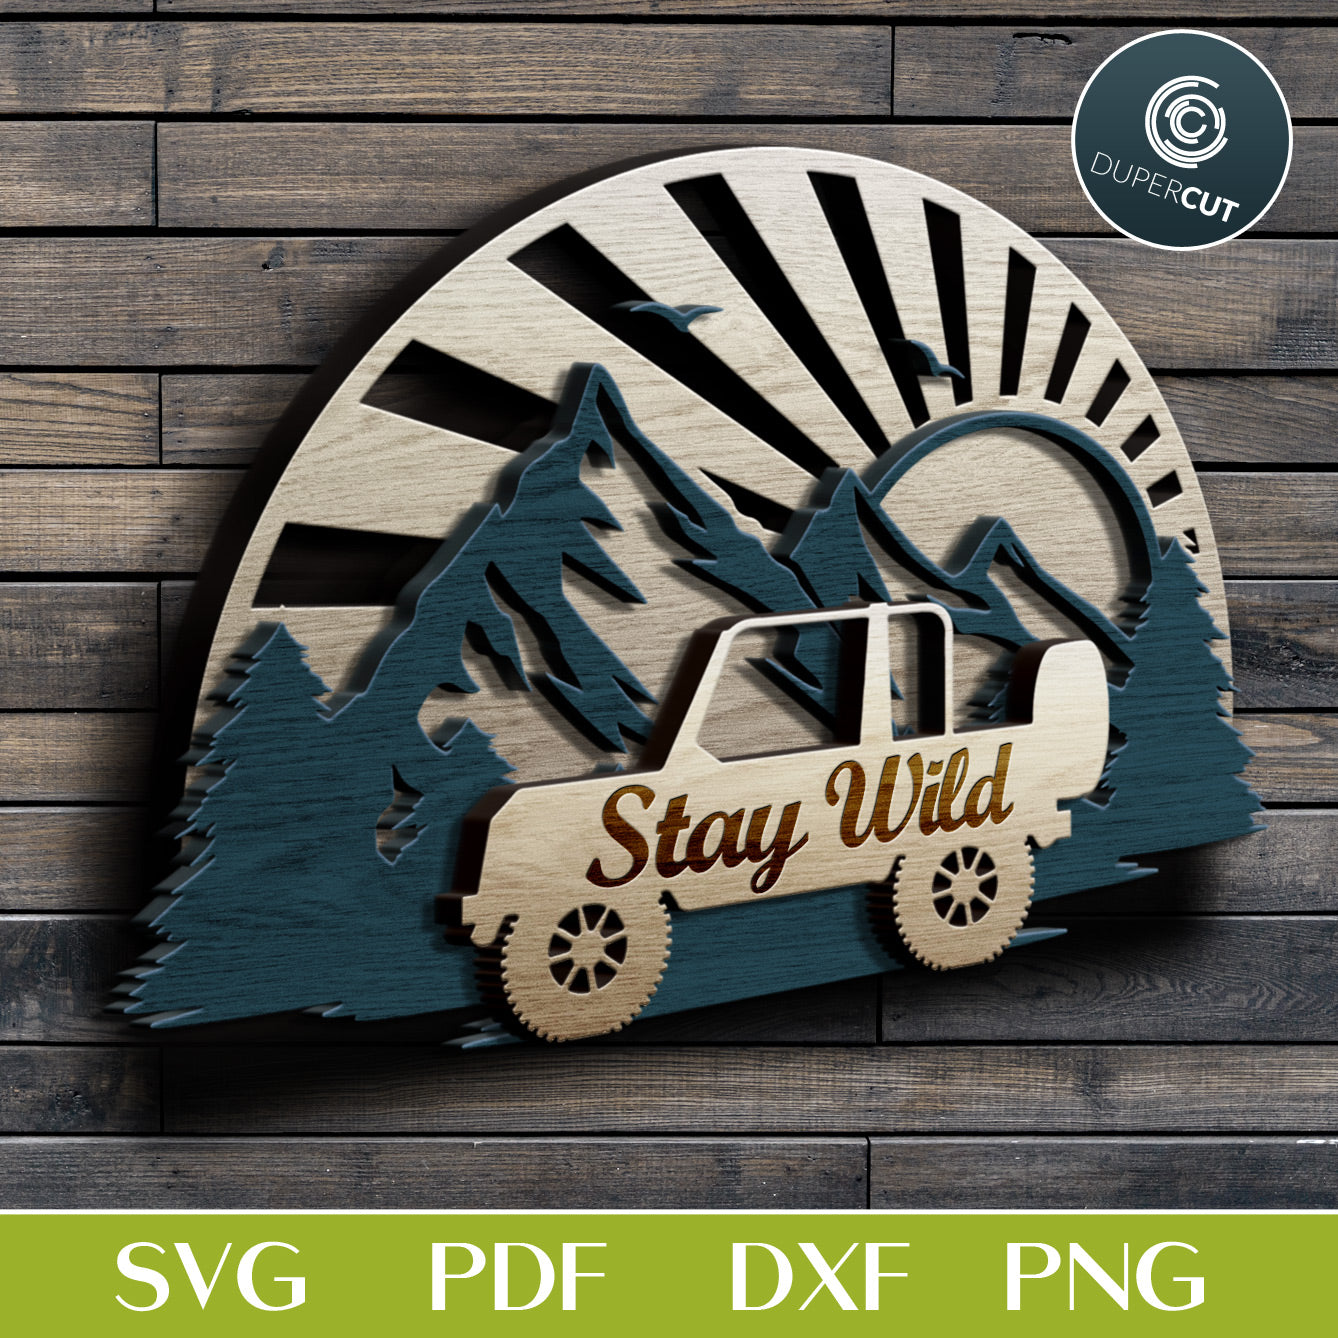 SUV Jeep wilderness adventure sign - SVG PDF DXF dual-layer cutting files for Glowforge, Cricut, Silhouette, CNC plasma machines, woodworking